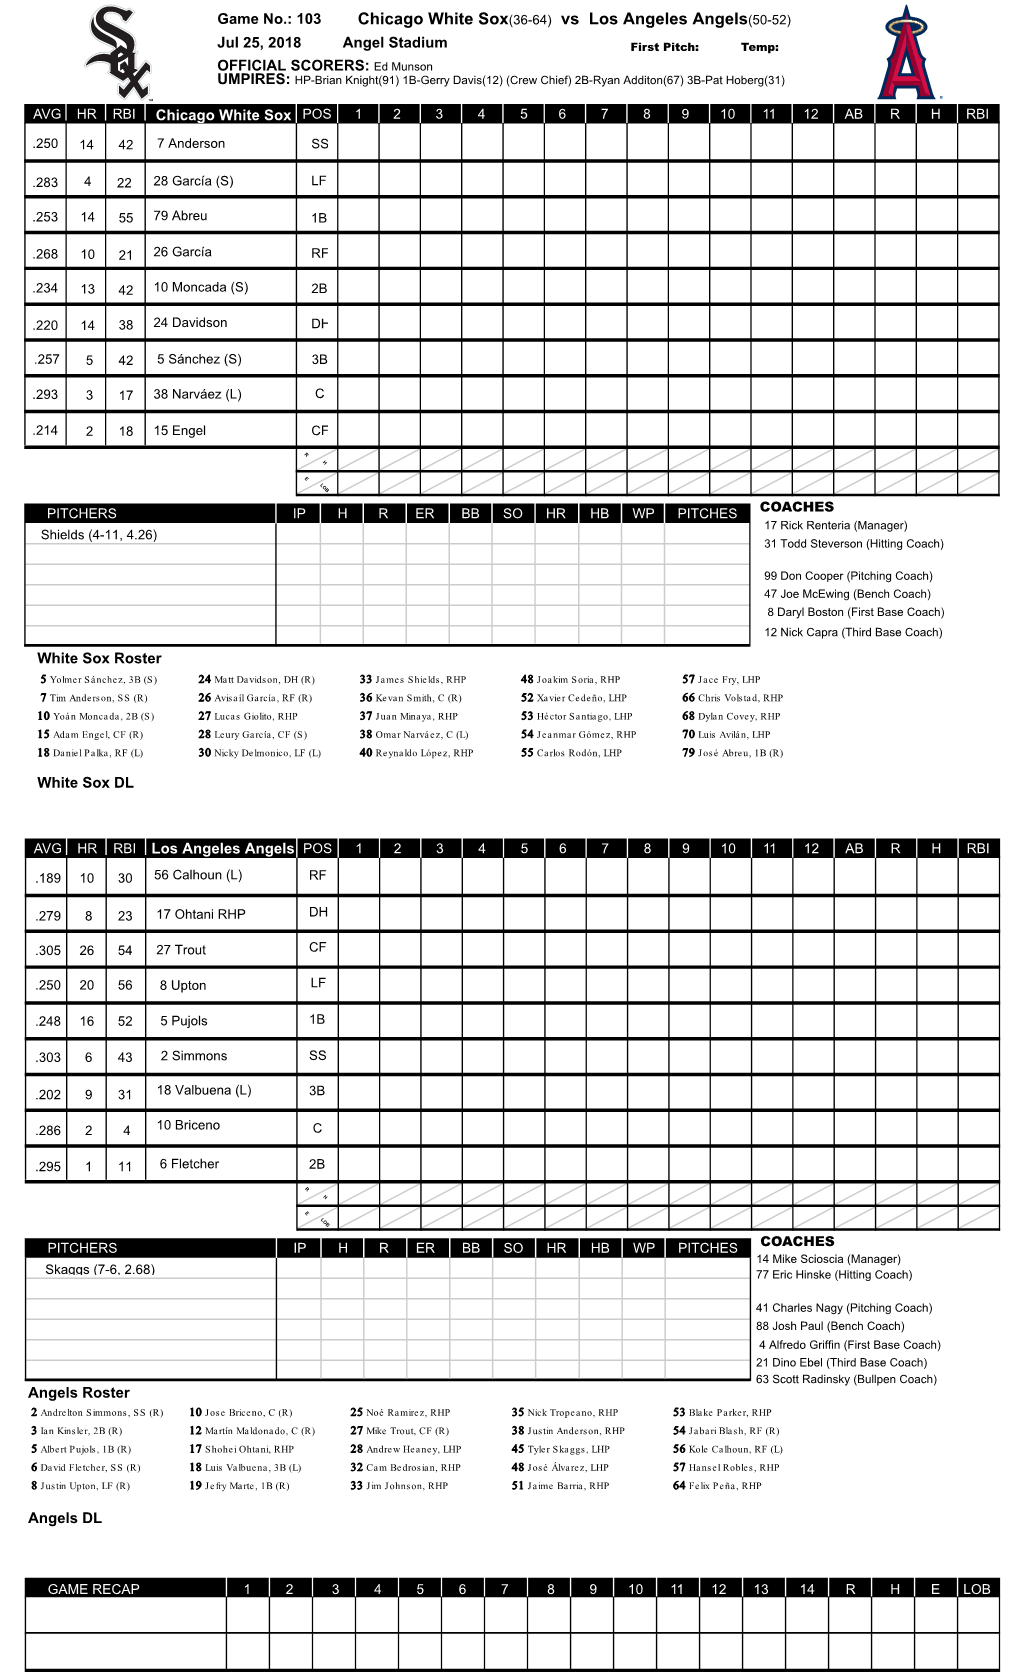 Chicago White Sox(36-64) Vs Los Angeles Angels(50-52)